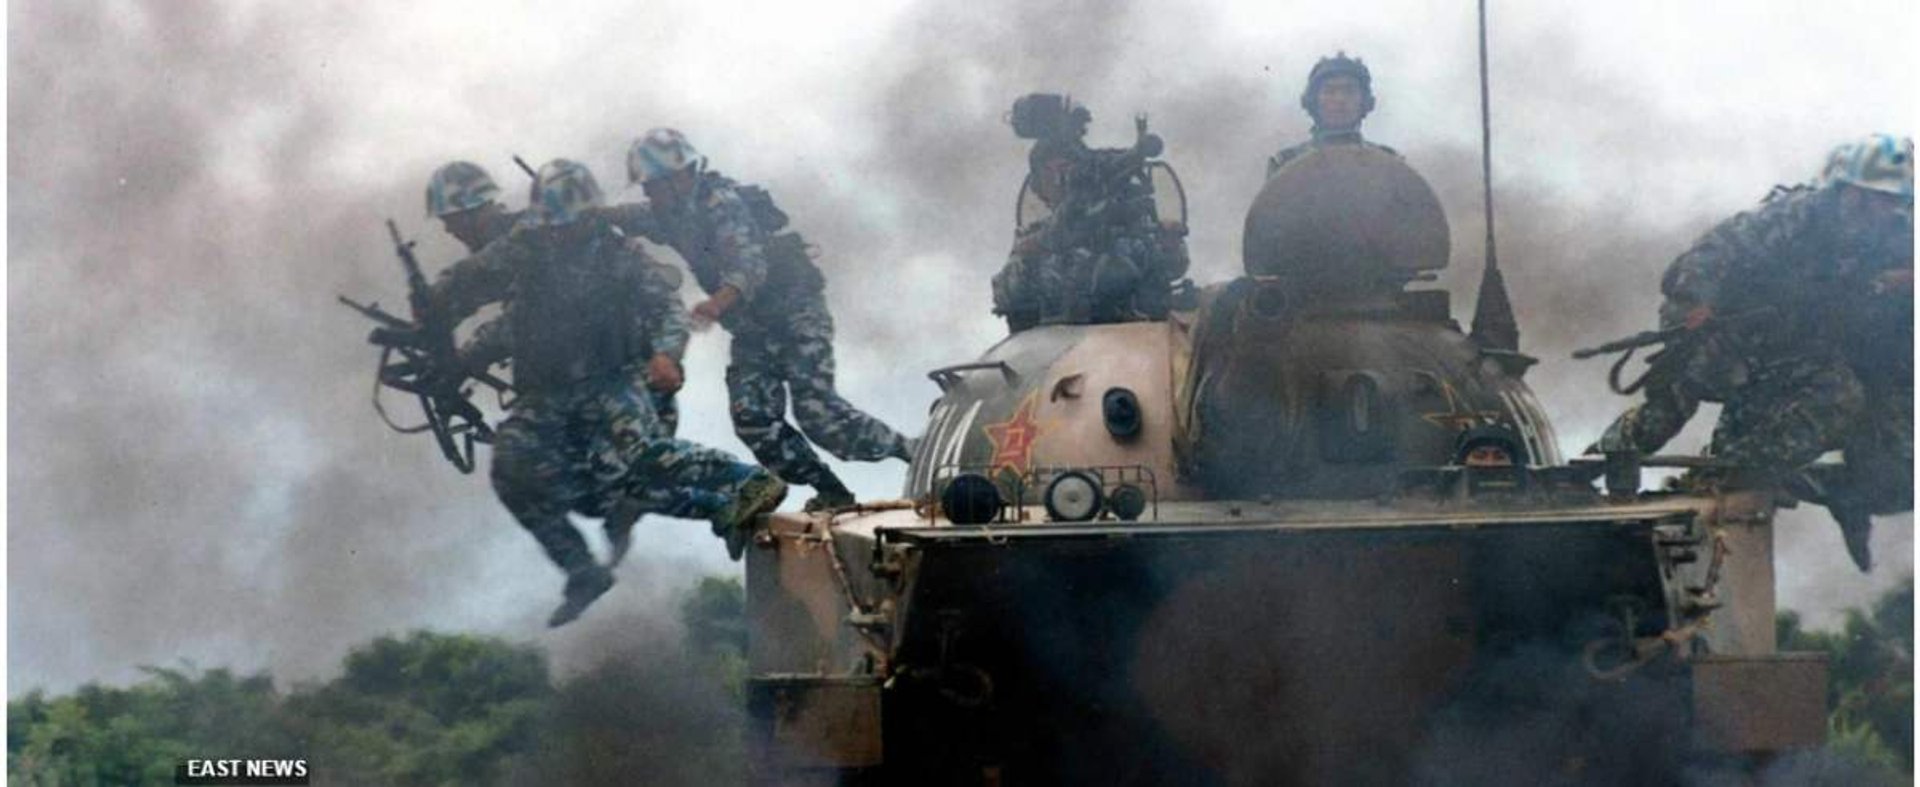 PHOTO: EAST NEWS CHINSCY ZOLNIERZE MARINES SKACZA Z CZOLGU PODCZAS CWICZEN WOJSKOWYCH W POLUDNIOWYCH CHINACH (FILES) This file photograph released 20 July 1999 shows Chinese Marines jumping off a tank during military exercises at an undisclosed location i